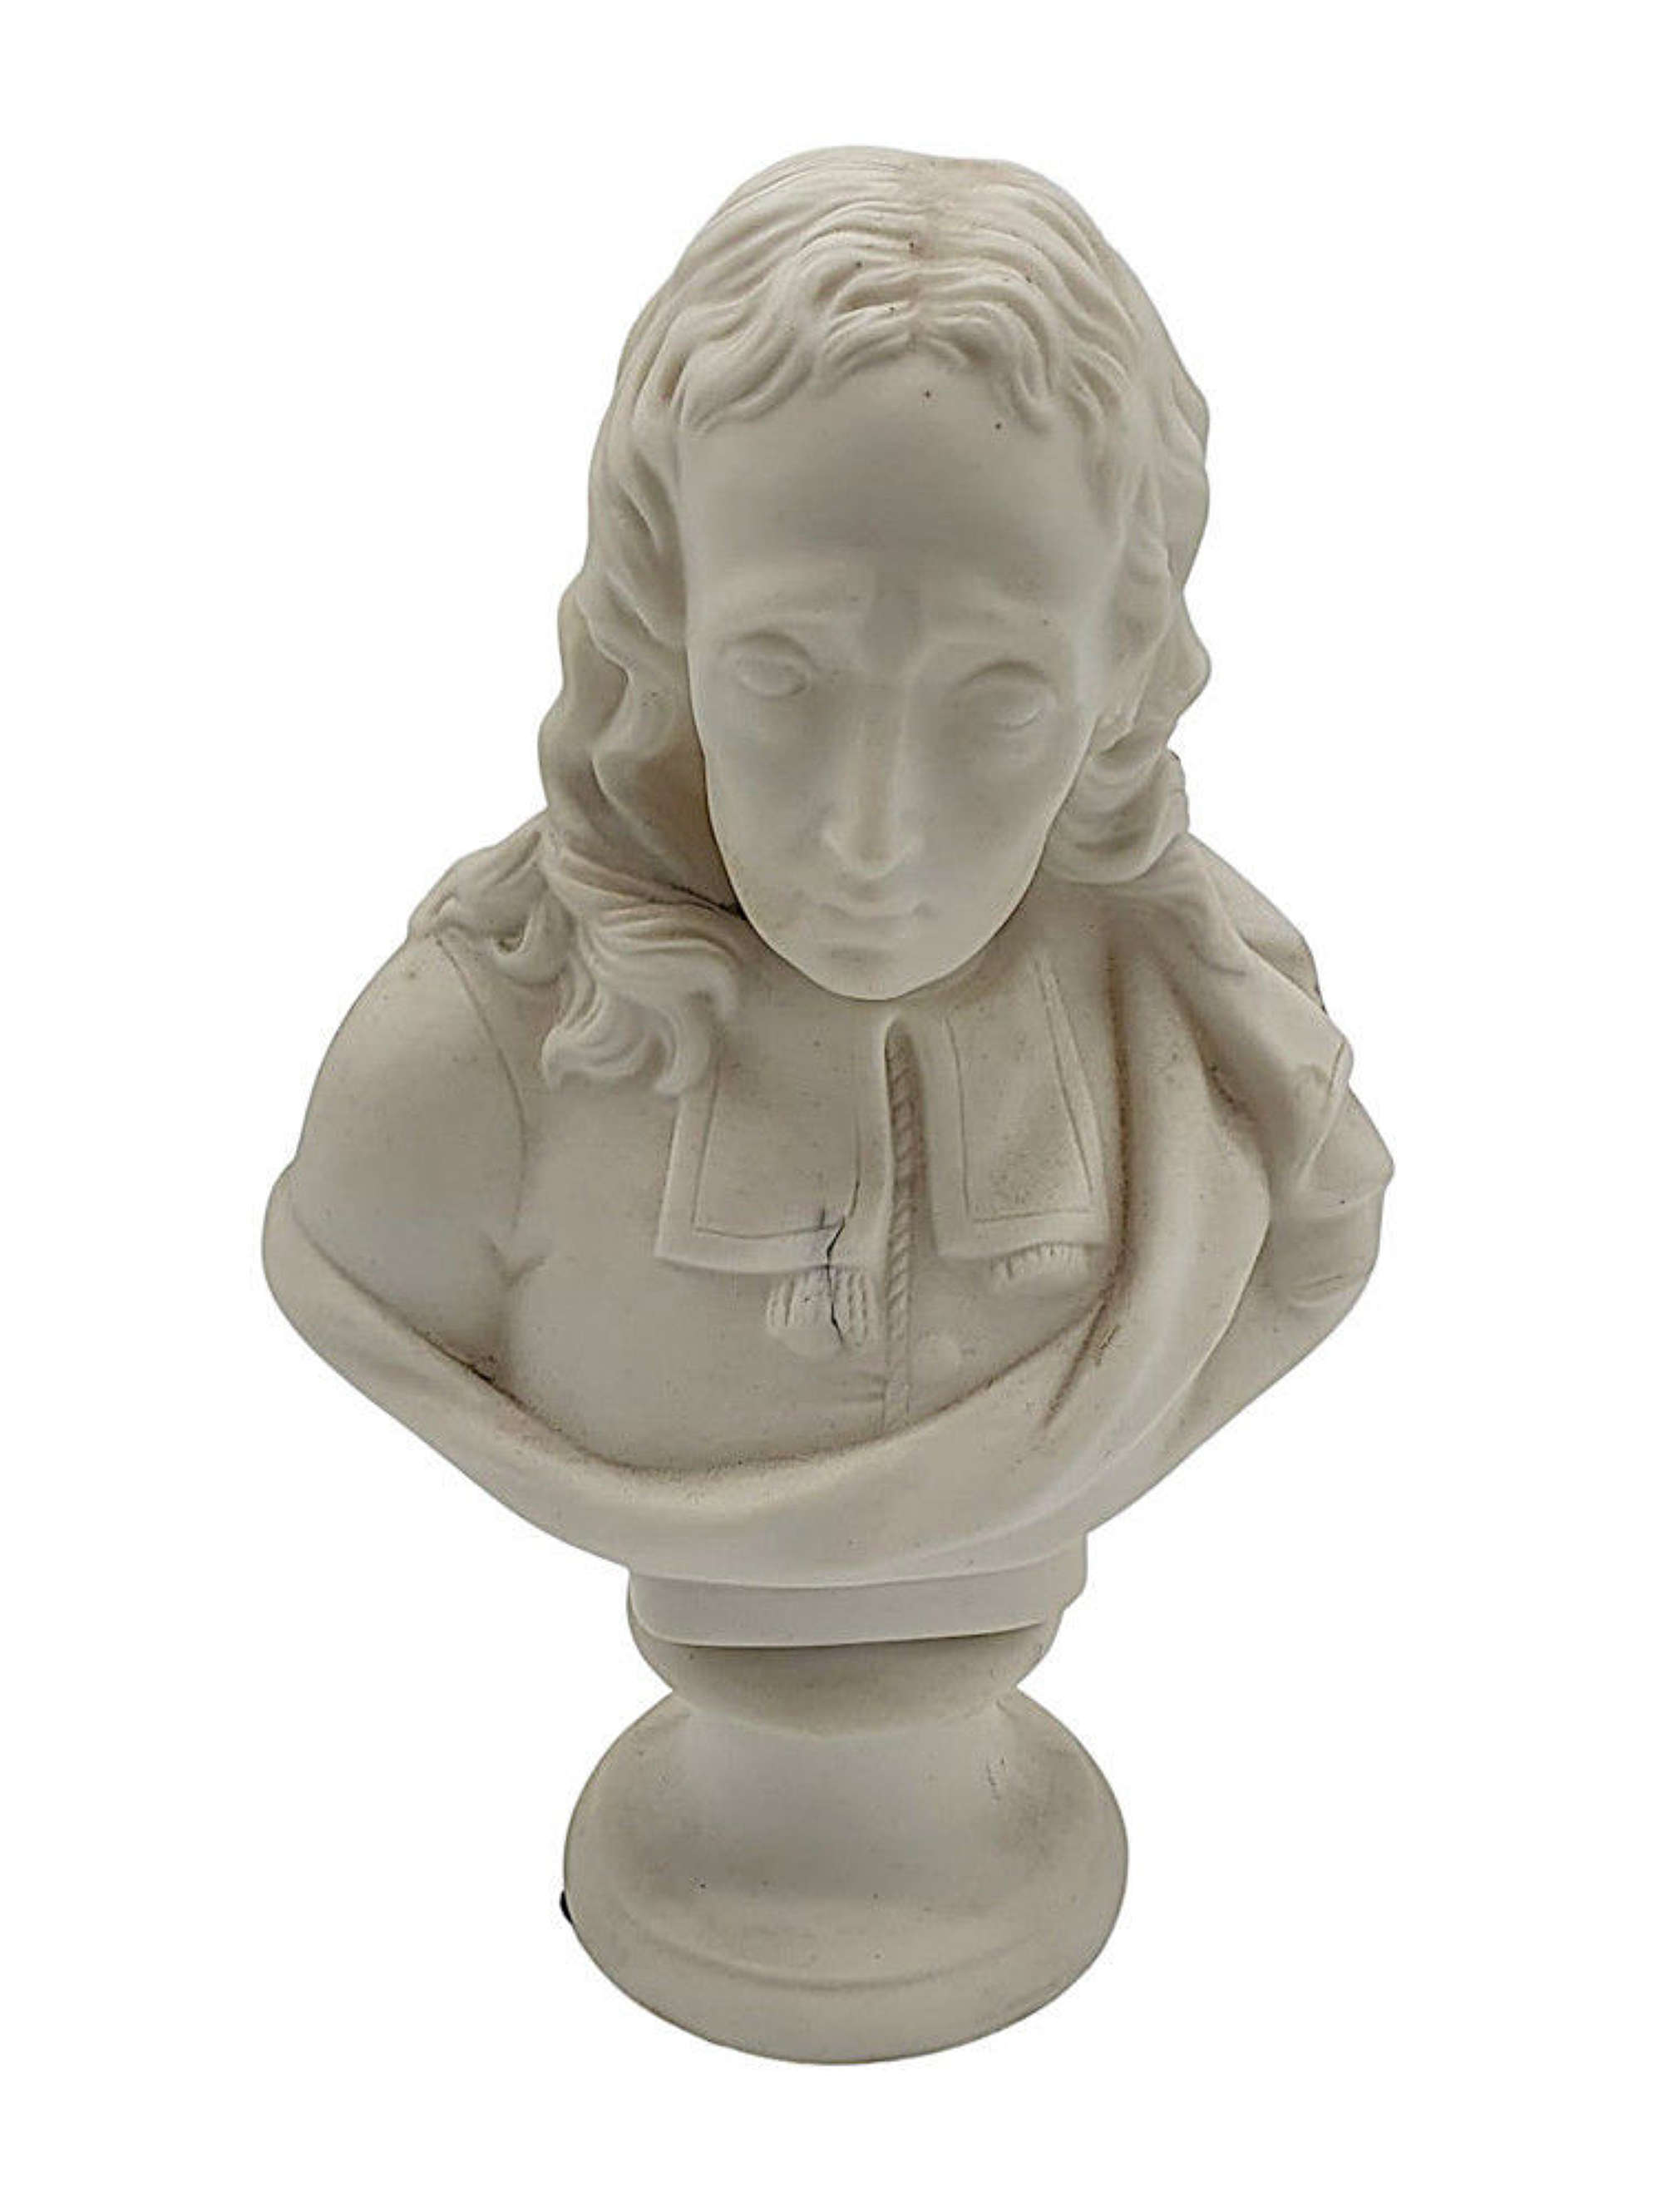 A Lovely 19th Century Parian Ware Bust Depicting The Renowned Author J